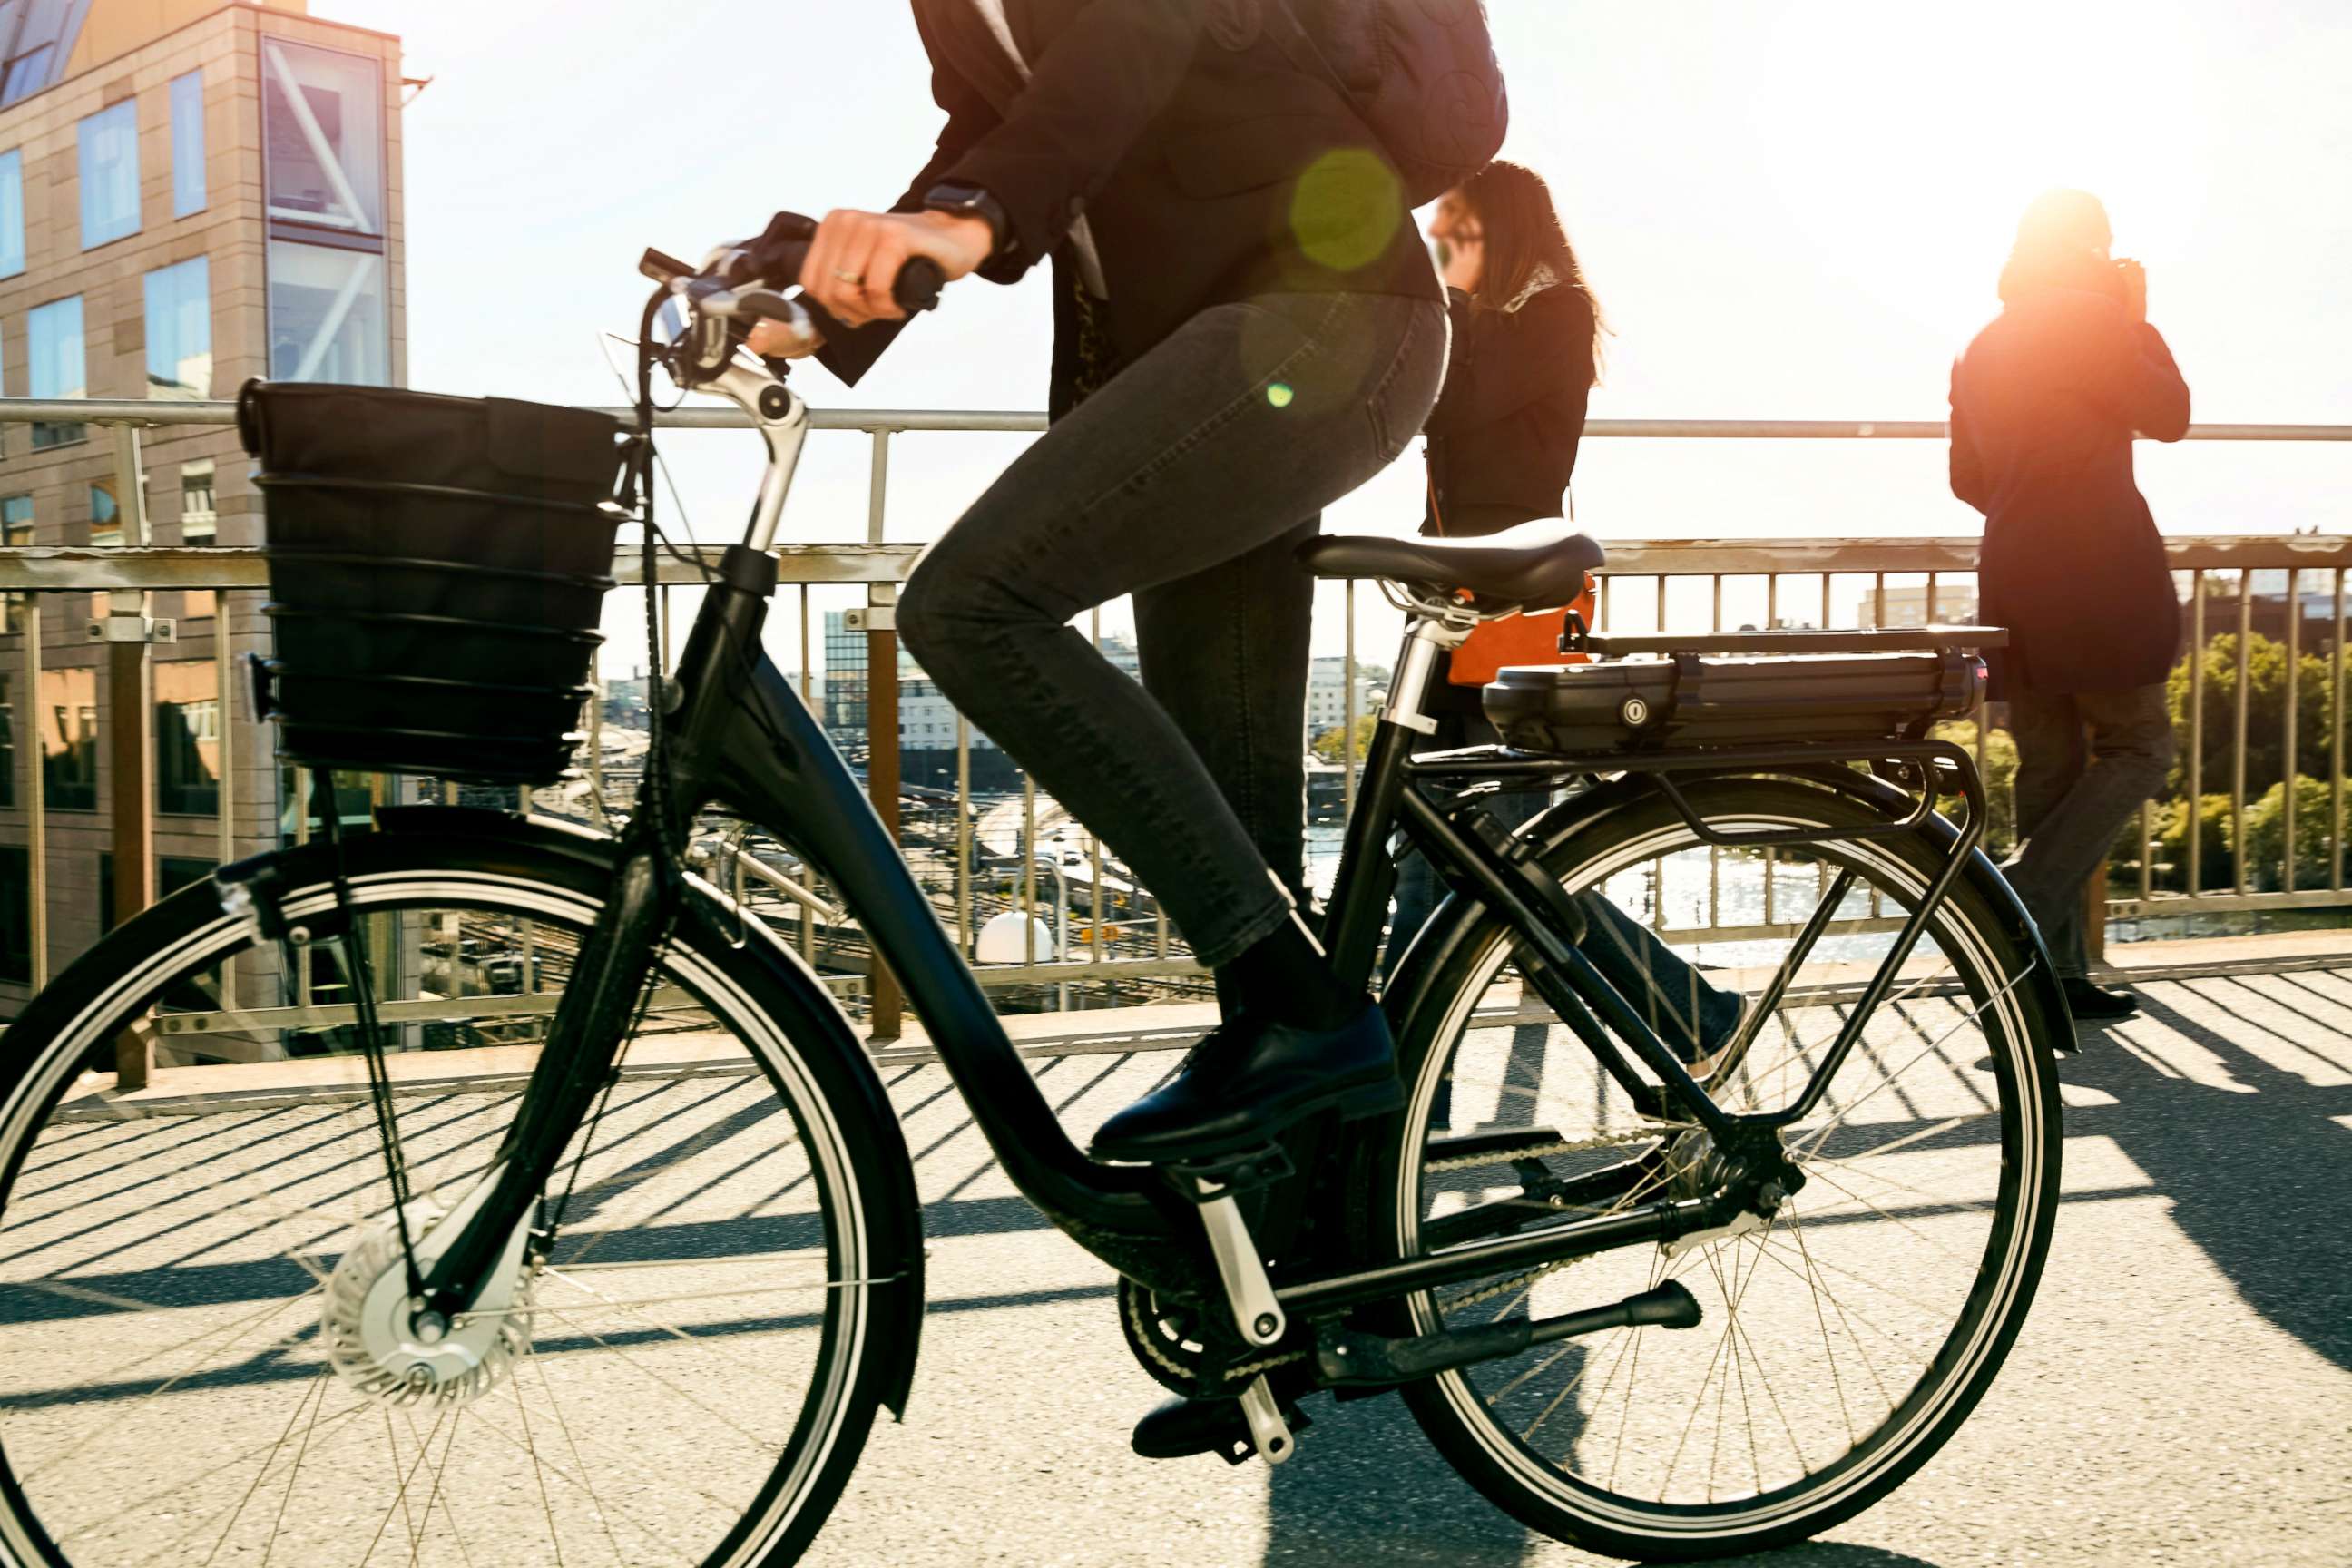 PHOTO: A person rides and e-bike in this stock photo.